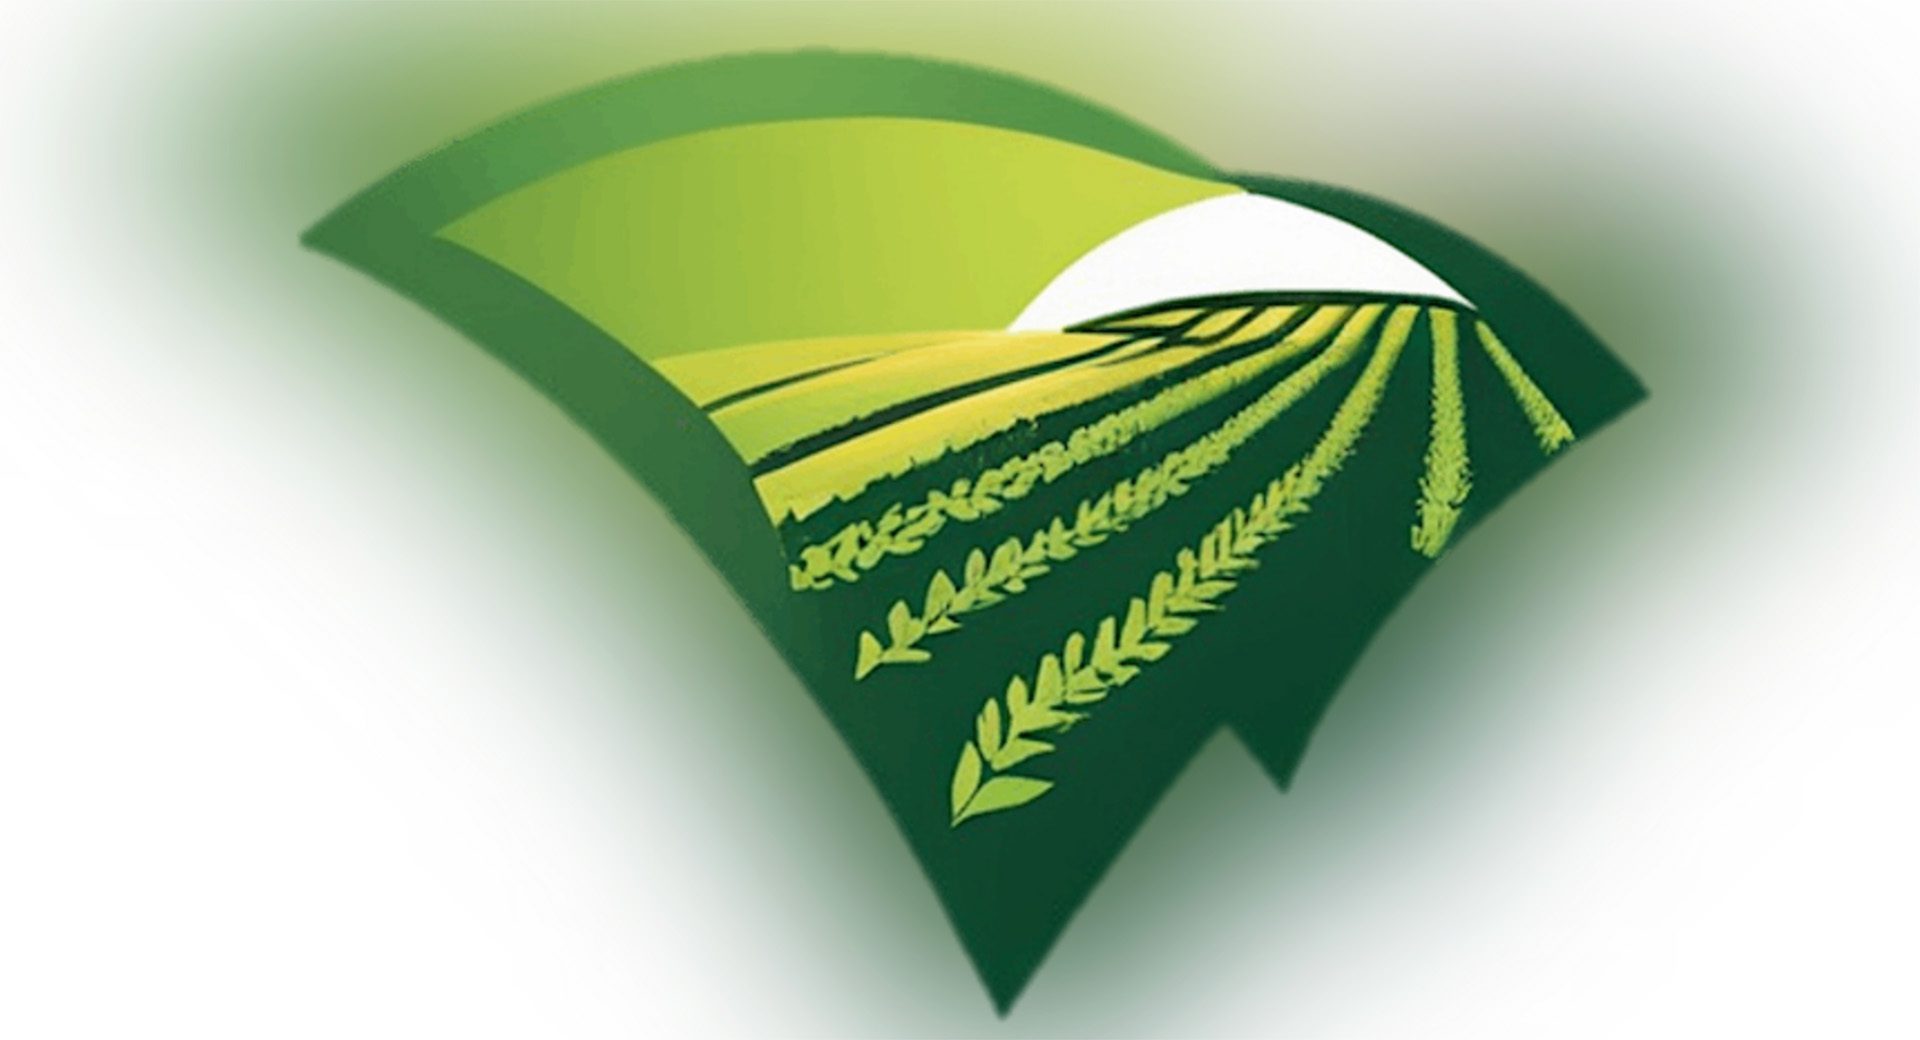 Economic considerations, sustainability issues, technology and connectivity, and fruit and vegetable opportunities are on the agenda for the 2024 South Carolina Agriculture Technology and Business Forum, March 20 in West Columbia, South Carolina.